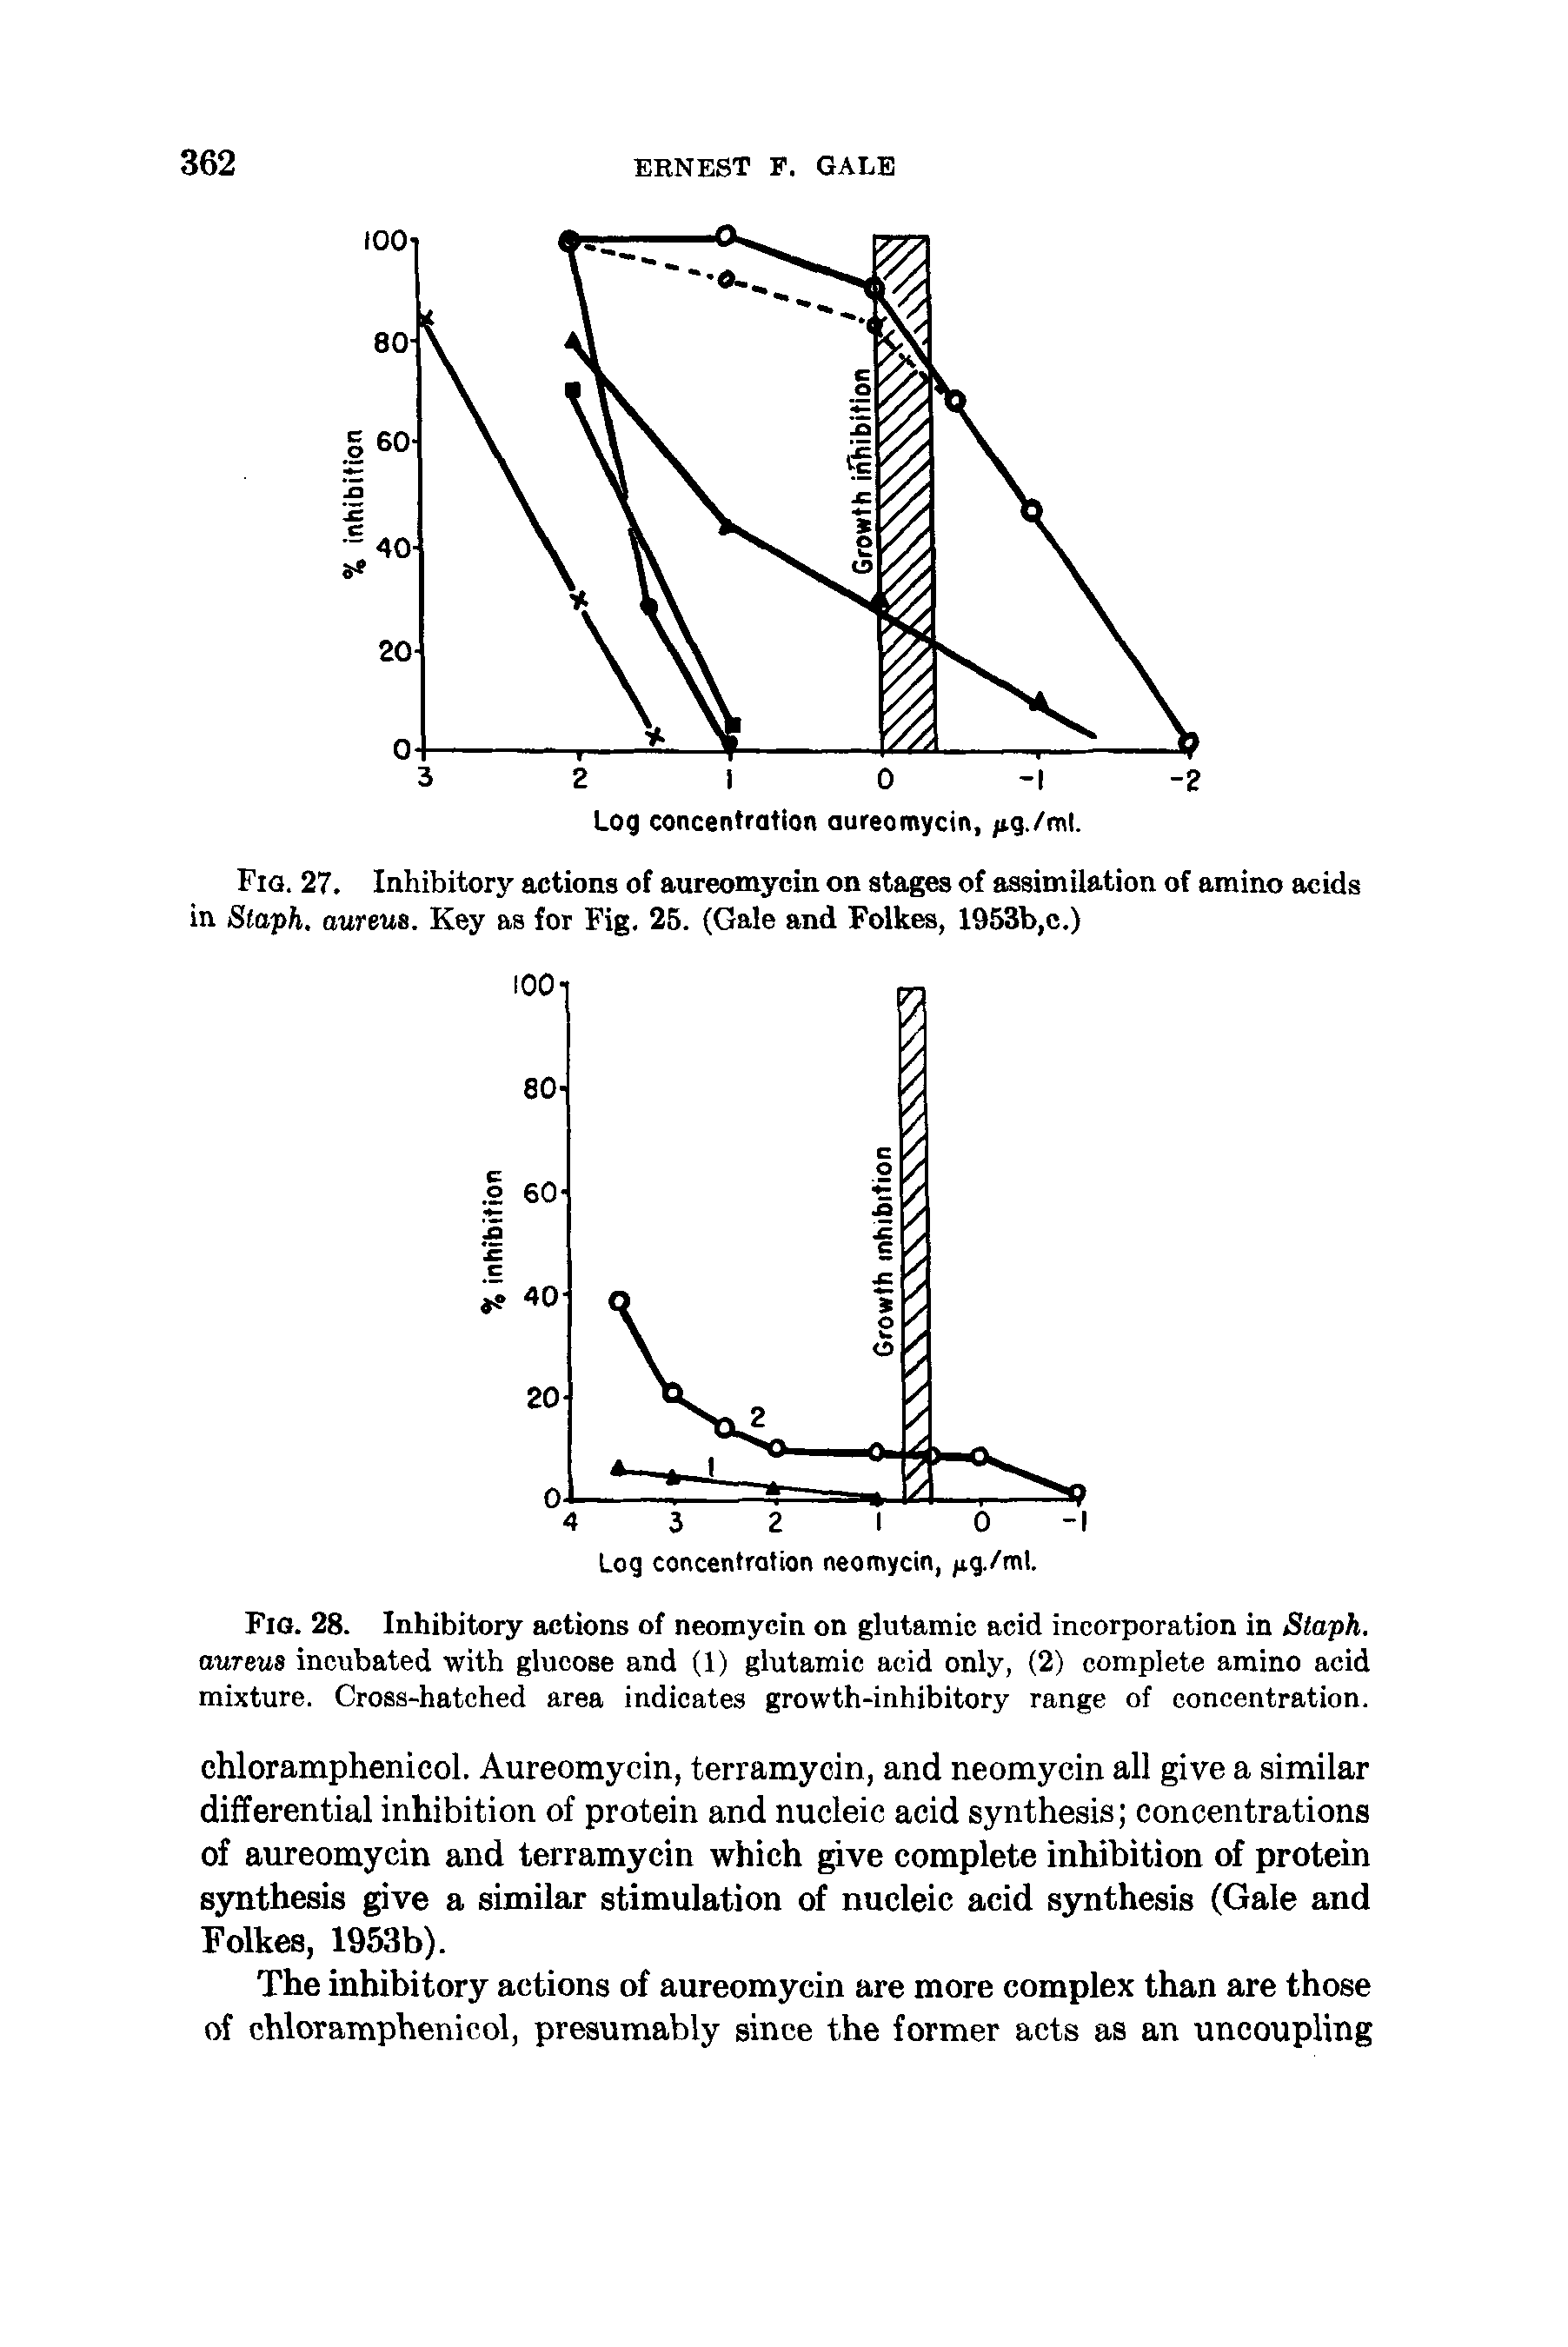 Fig. 28. Inhibitory actions of neomycin on glutamic acid incorporation in Staph, aureus incubated with glucose and (1) glutamic acid only, (2) complete amino acid mixture. Cross-hatched area indicates growth-inhibitory range of concentration.